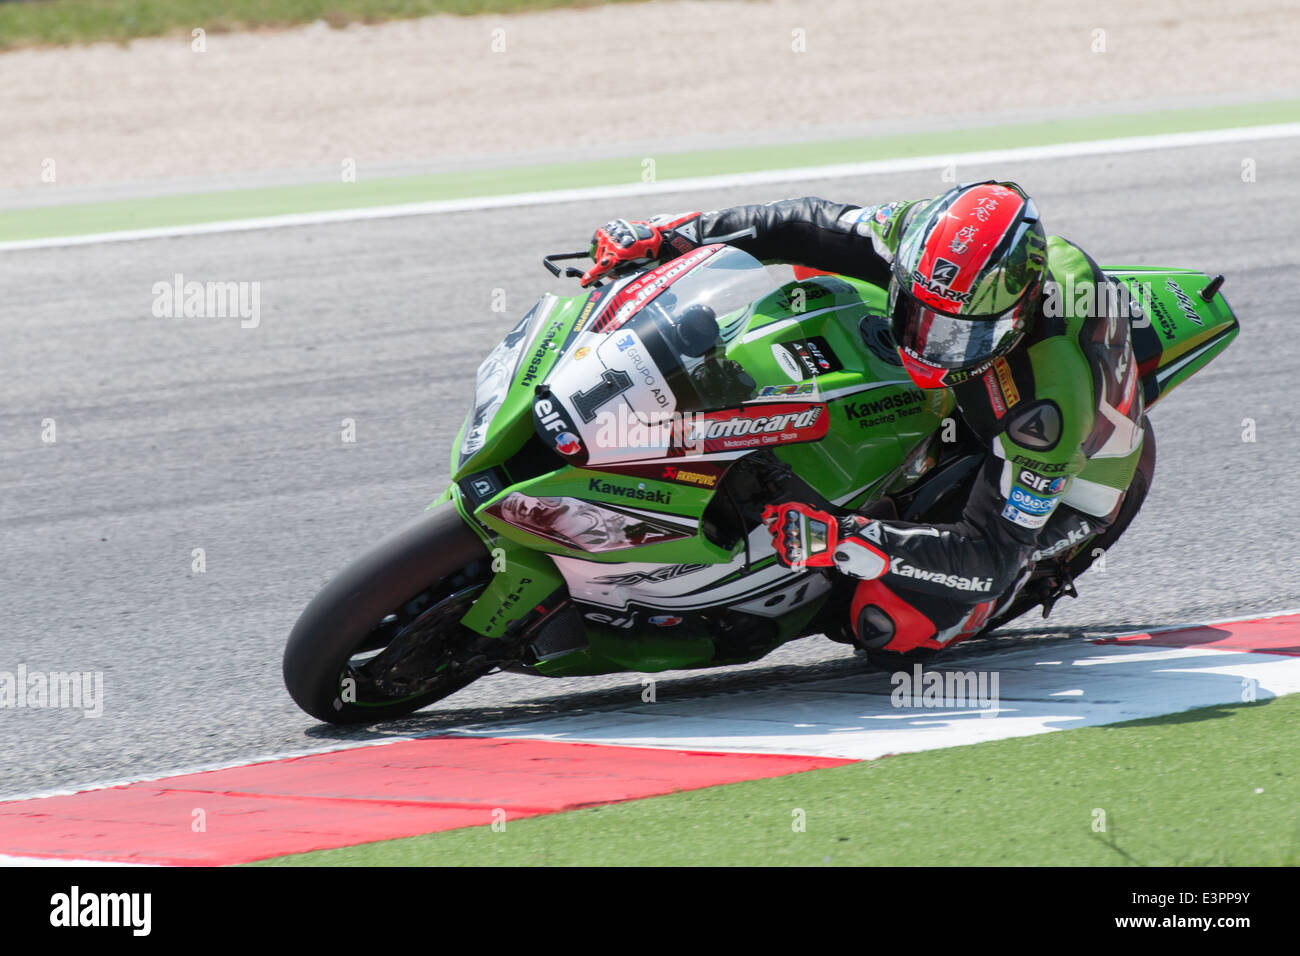 Kawasaki ZX-10R of KAWASAKI RACING TEAM , driven by SYKES Tom in action during the Superbike Free Practice 4th Session Stock Photo